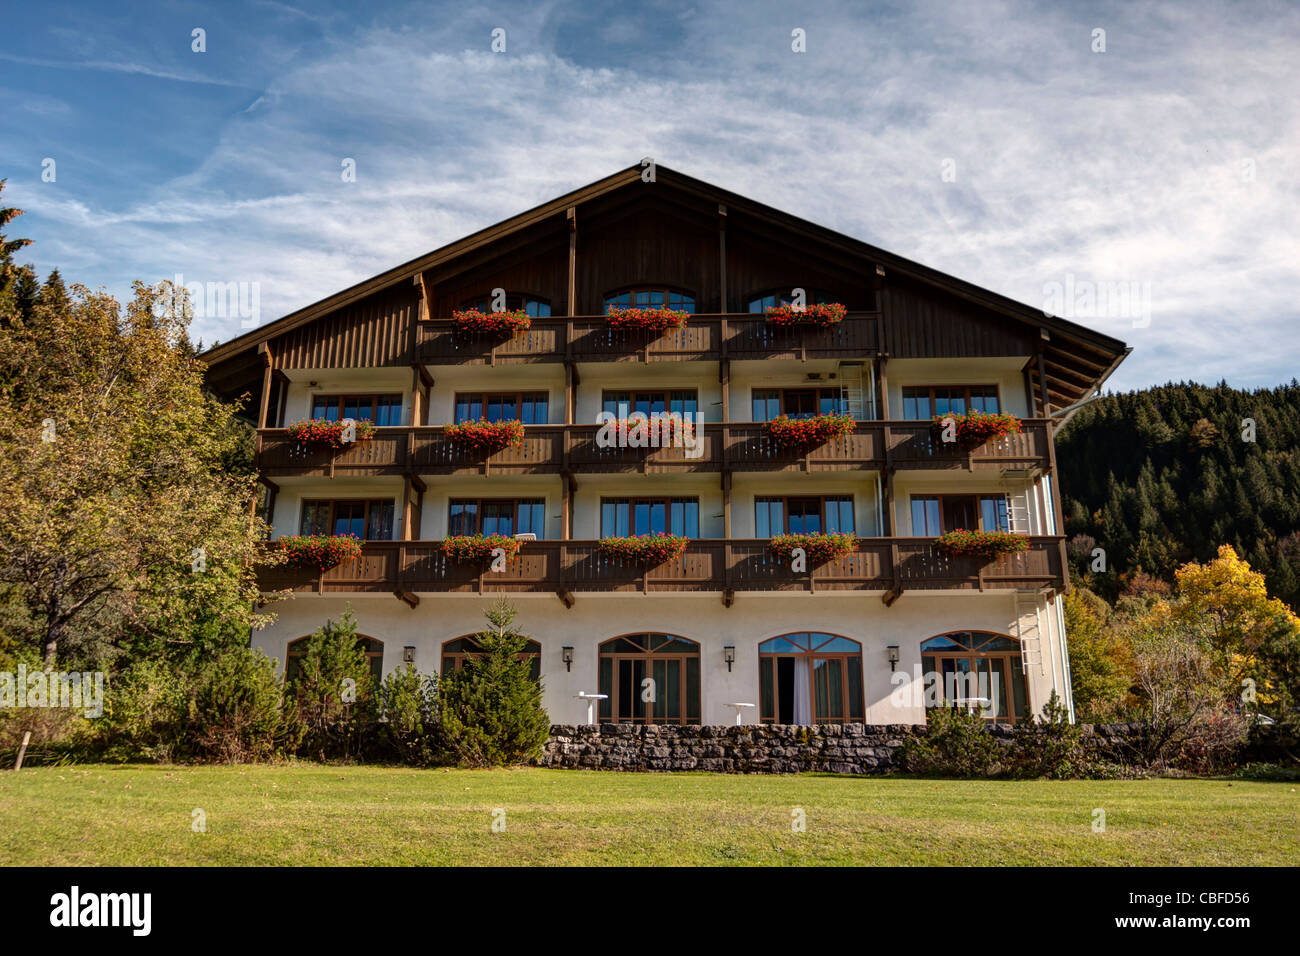 A wooden multi-story house in Spitzingsee, Bavaria, Germany. Stock Photo